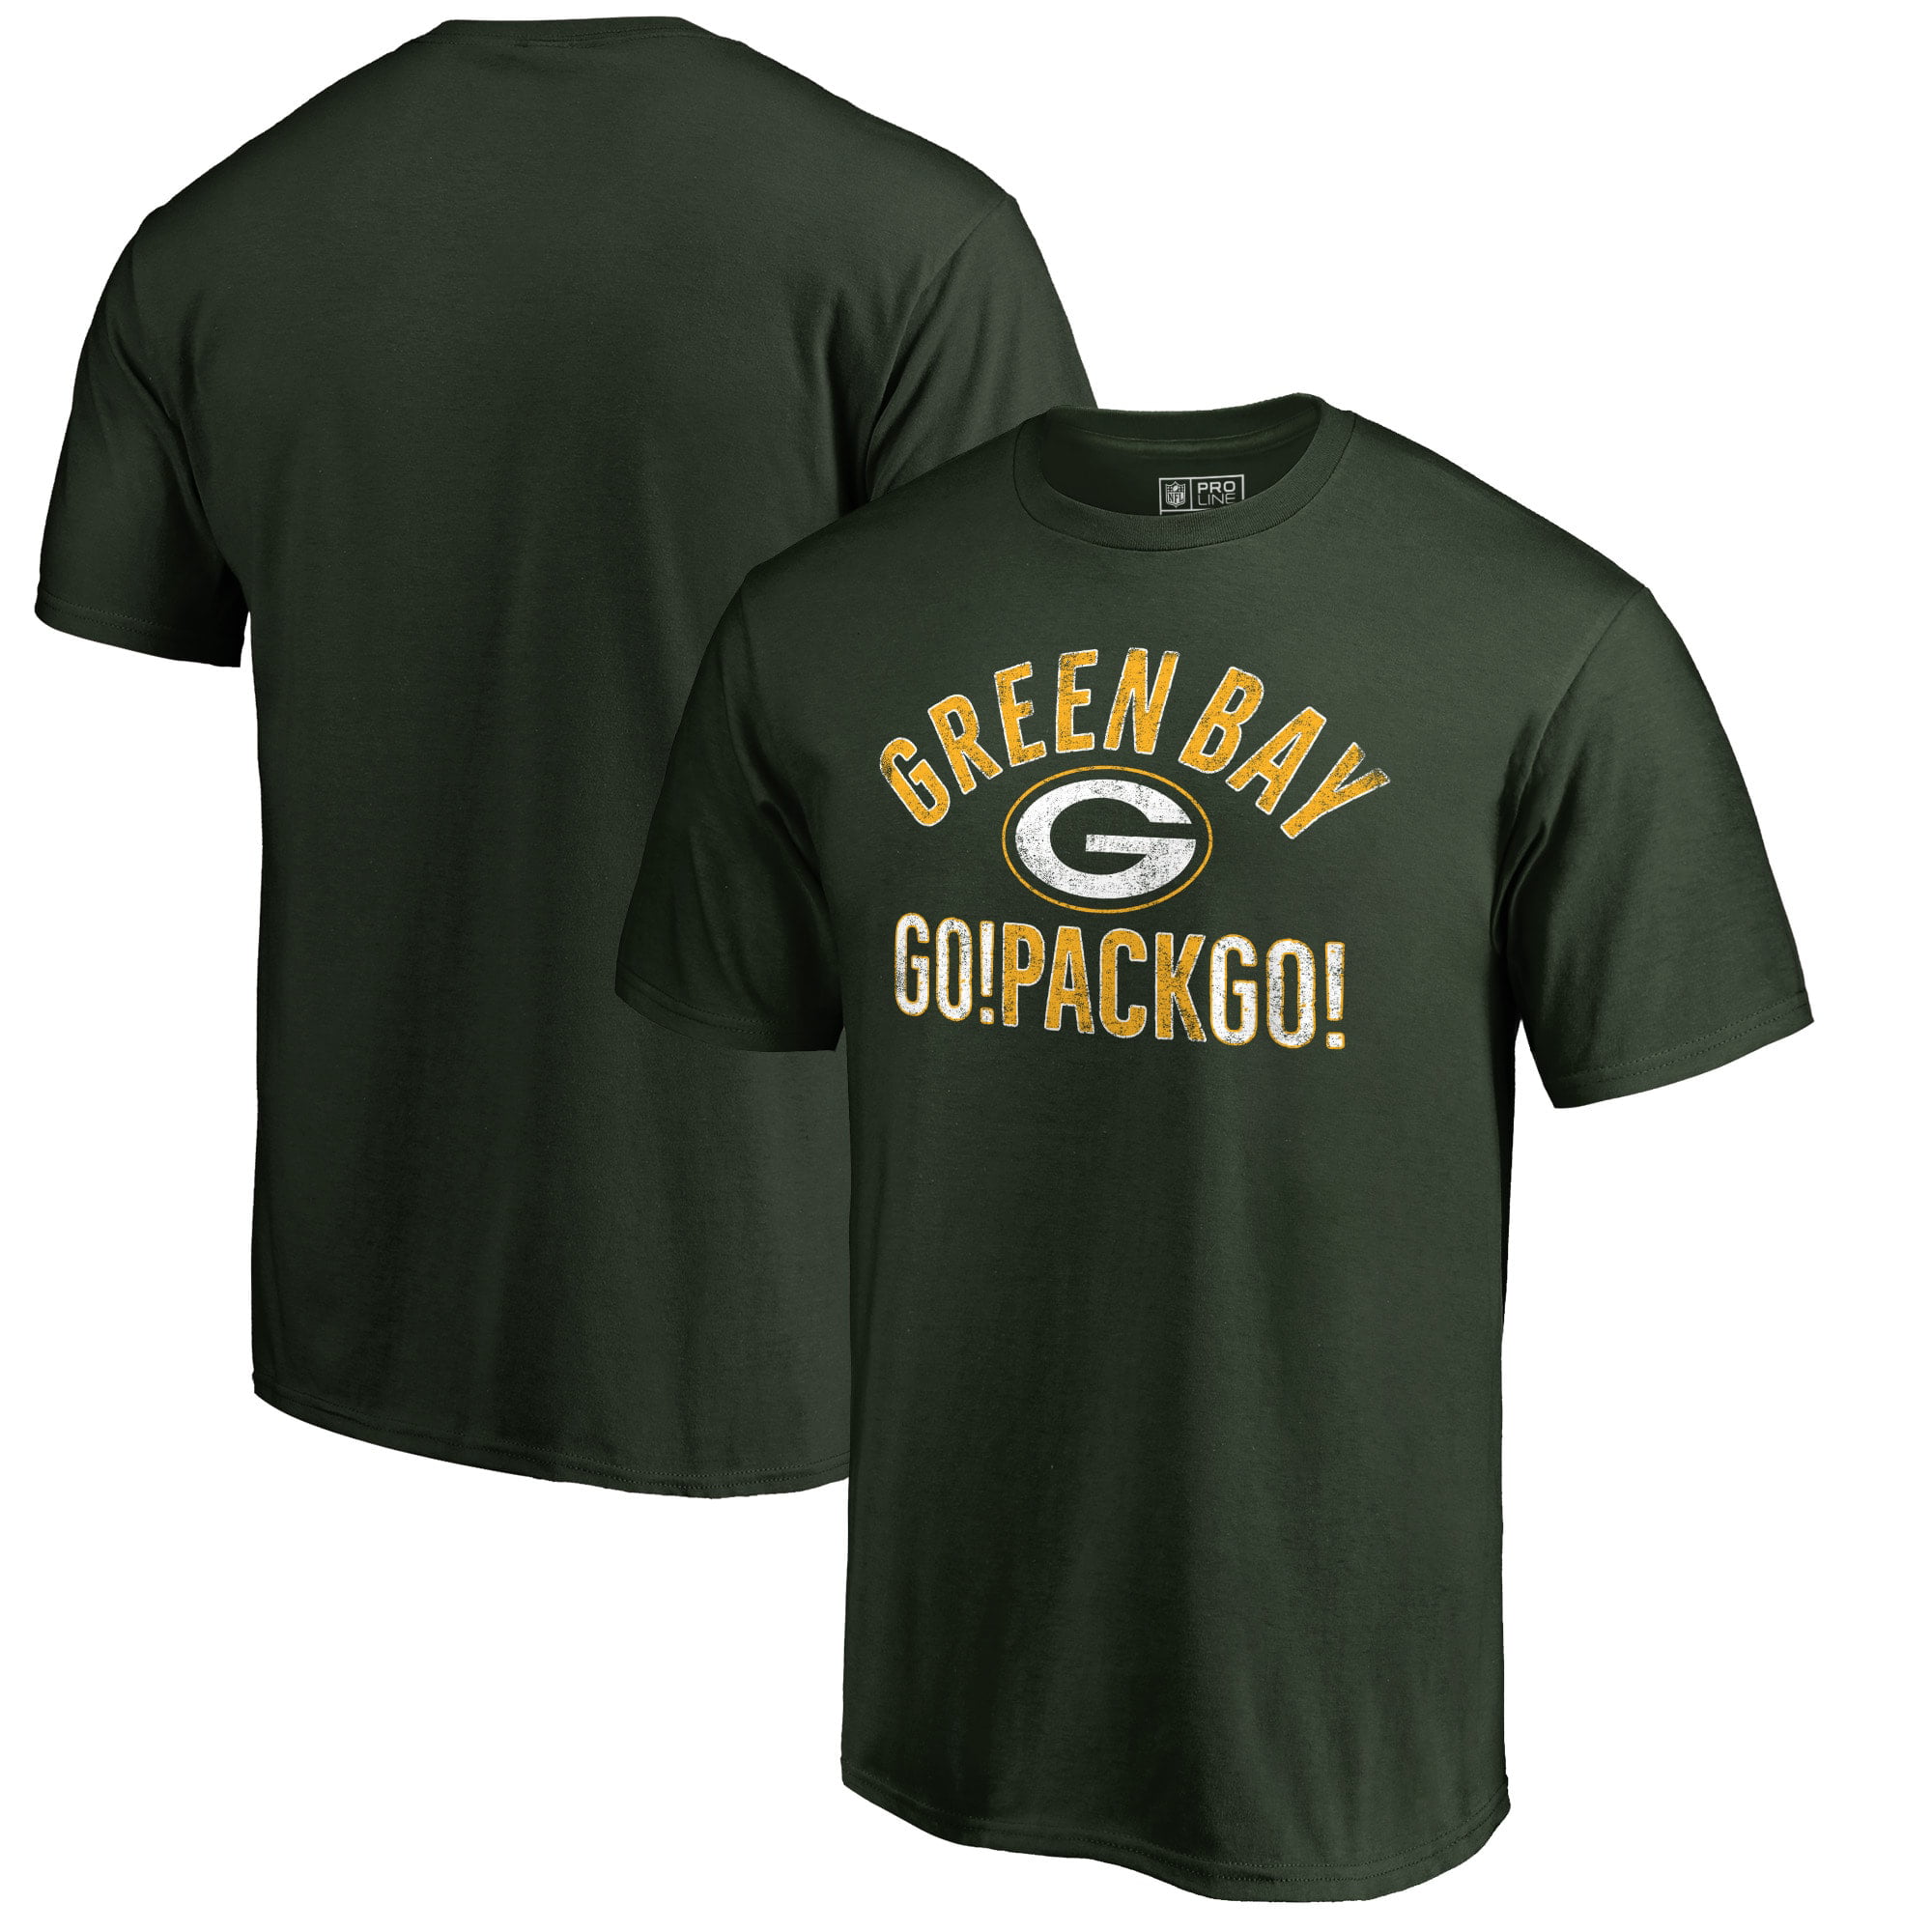 green bay packers couples shirts